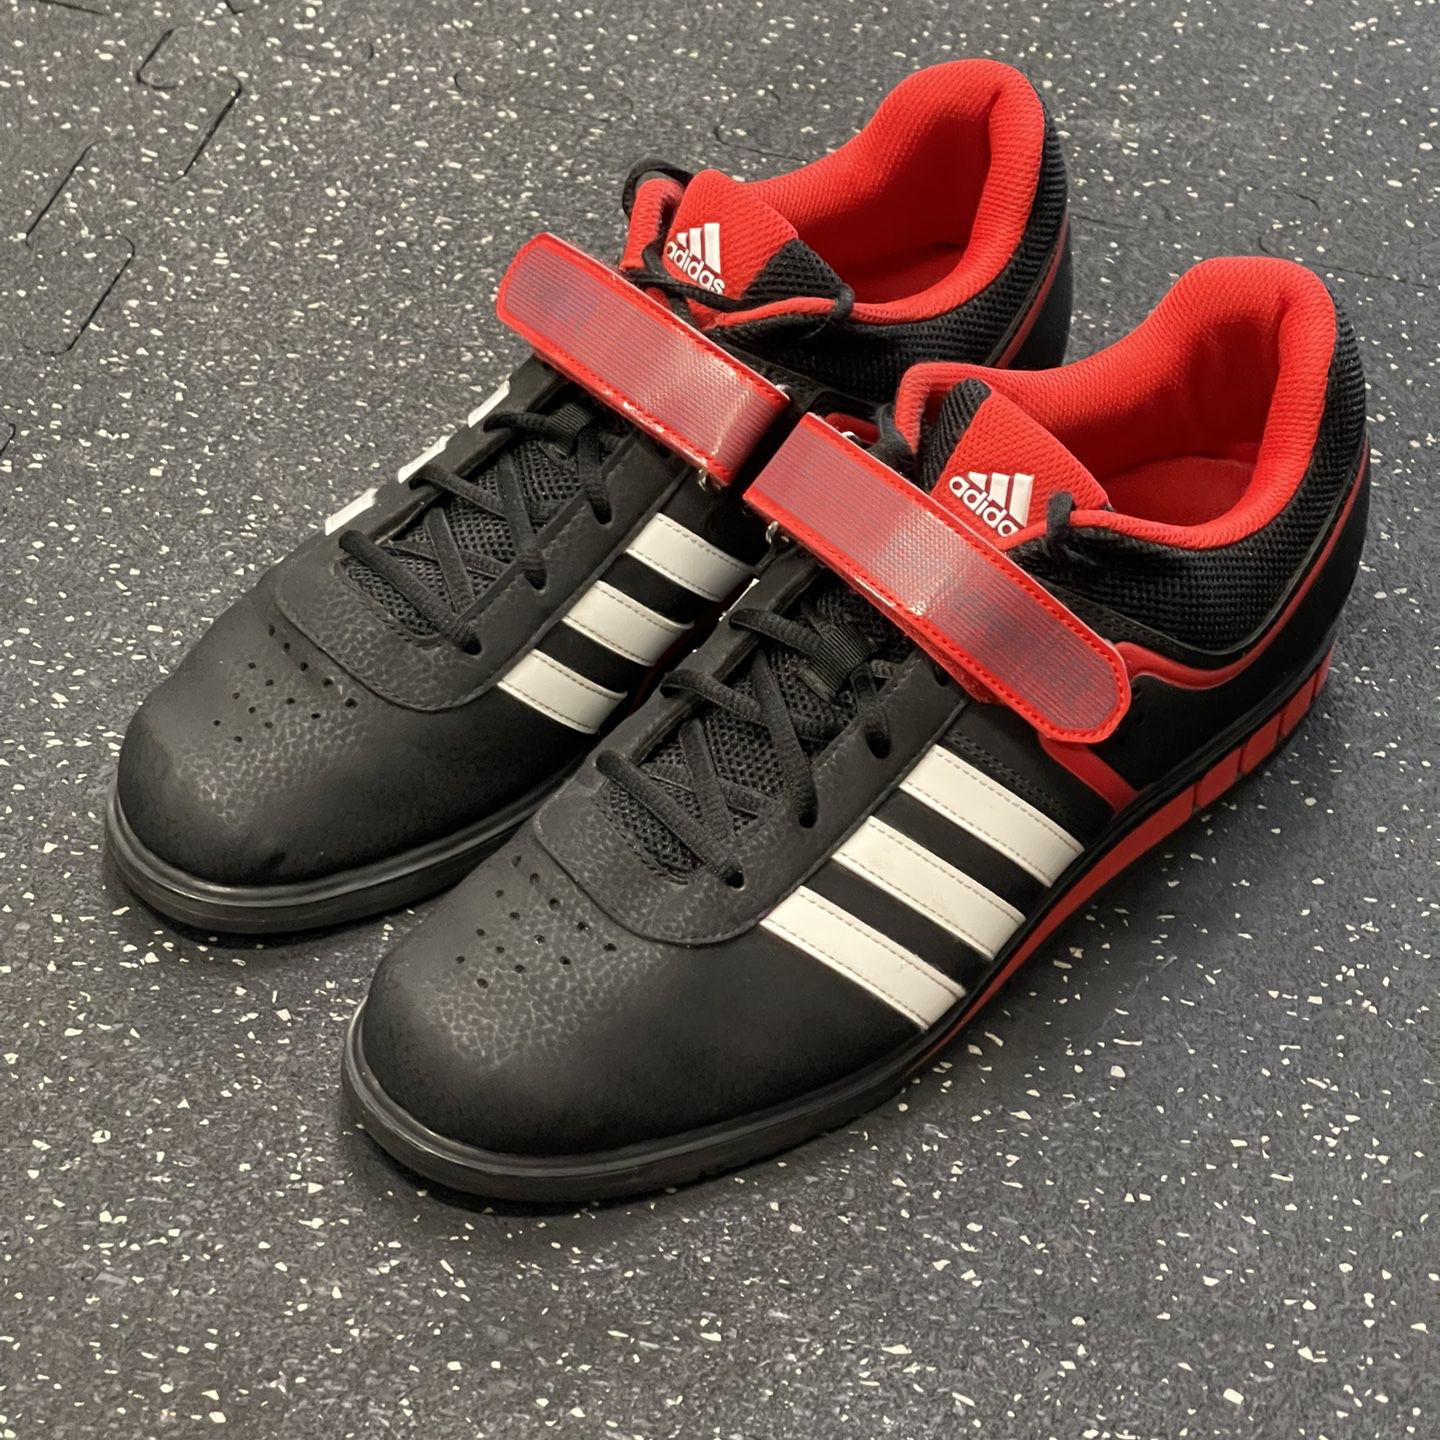 Adidas Powerlift 2 Athletic Weightlifting Shoes Black Red for Mesa, AZ - OfferUp